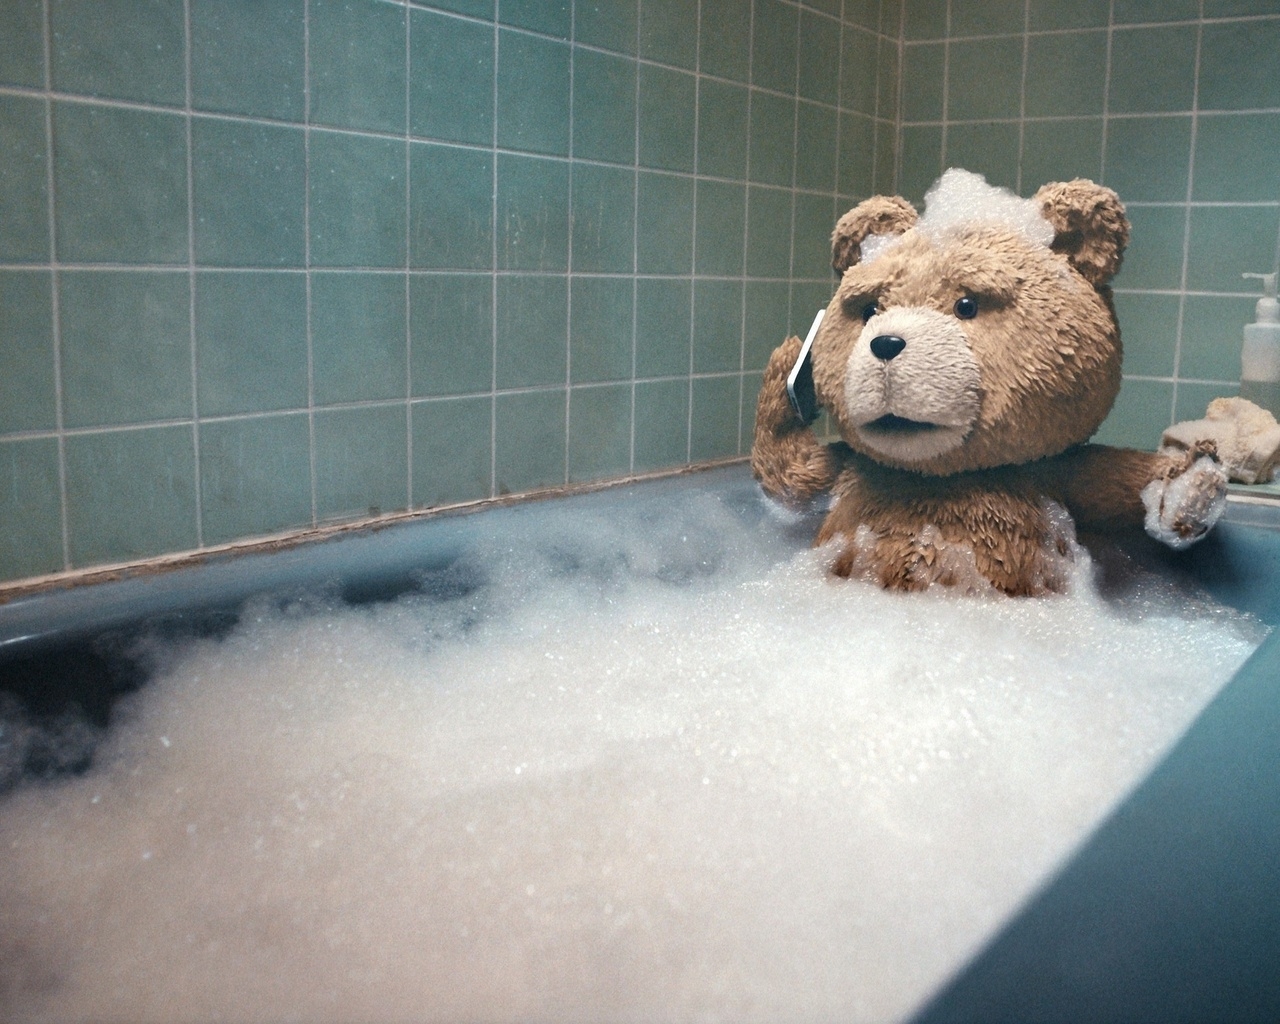 Ted taking a Bath for 1280 x 1024 resolution